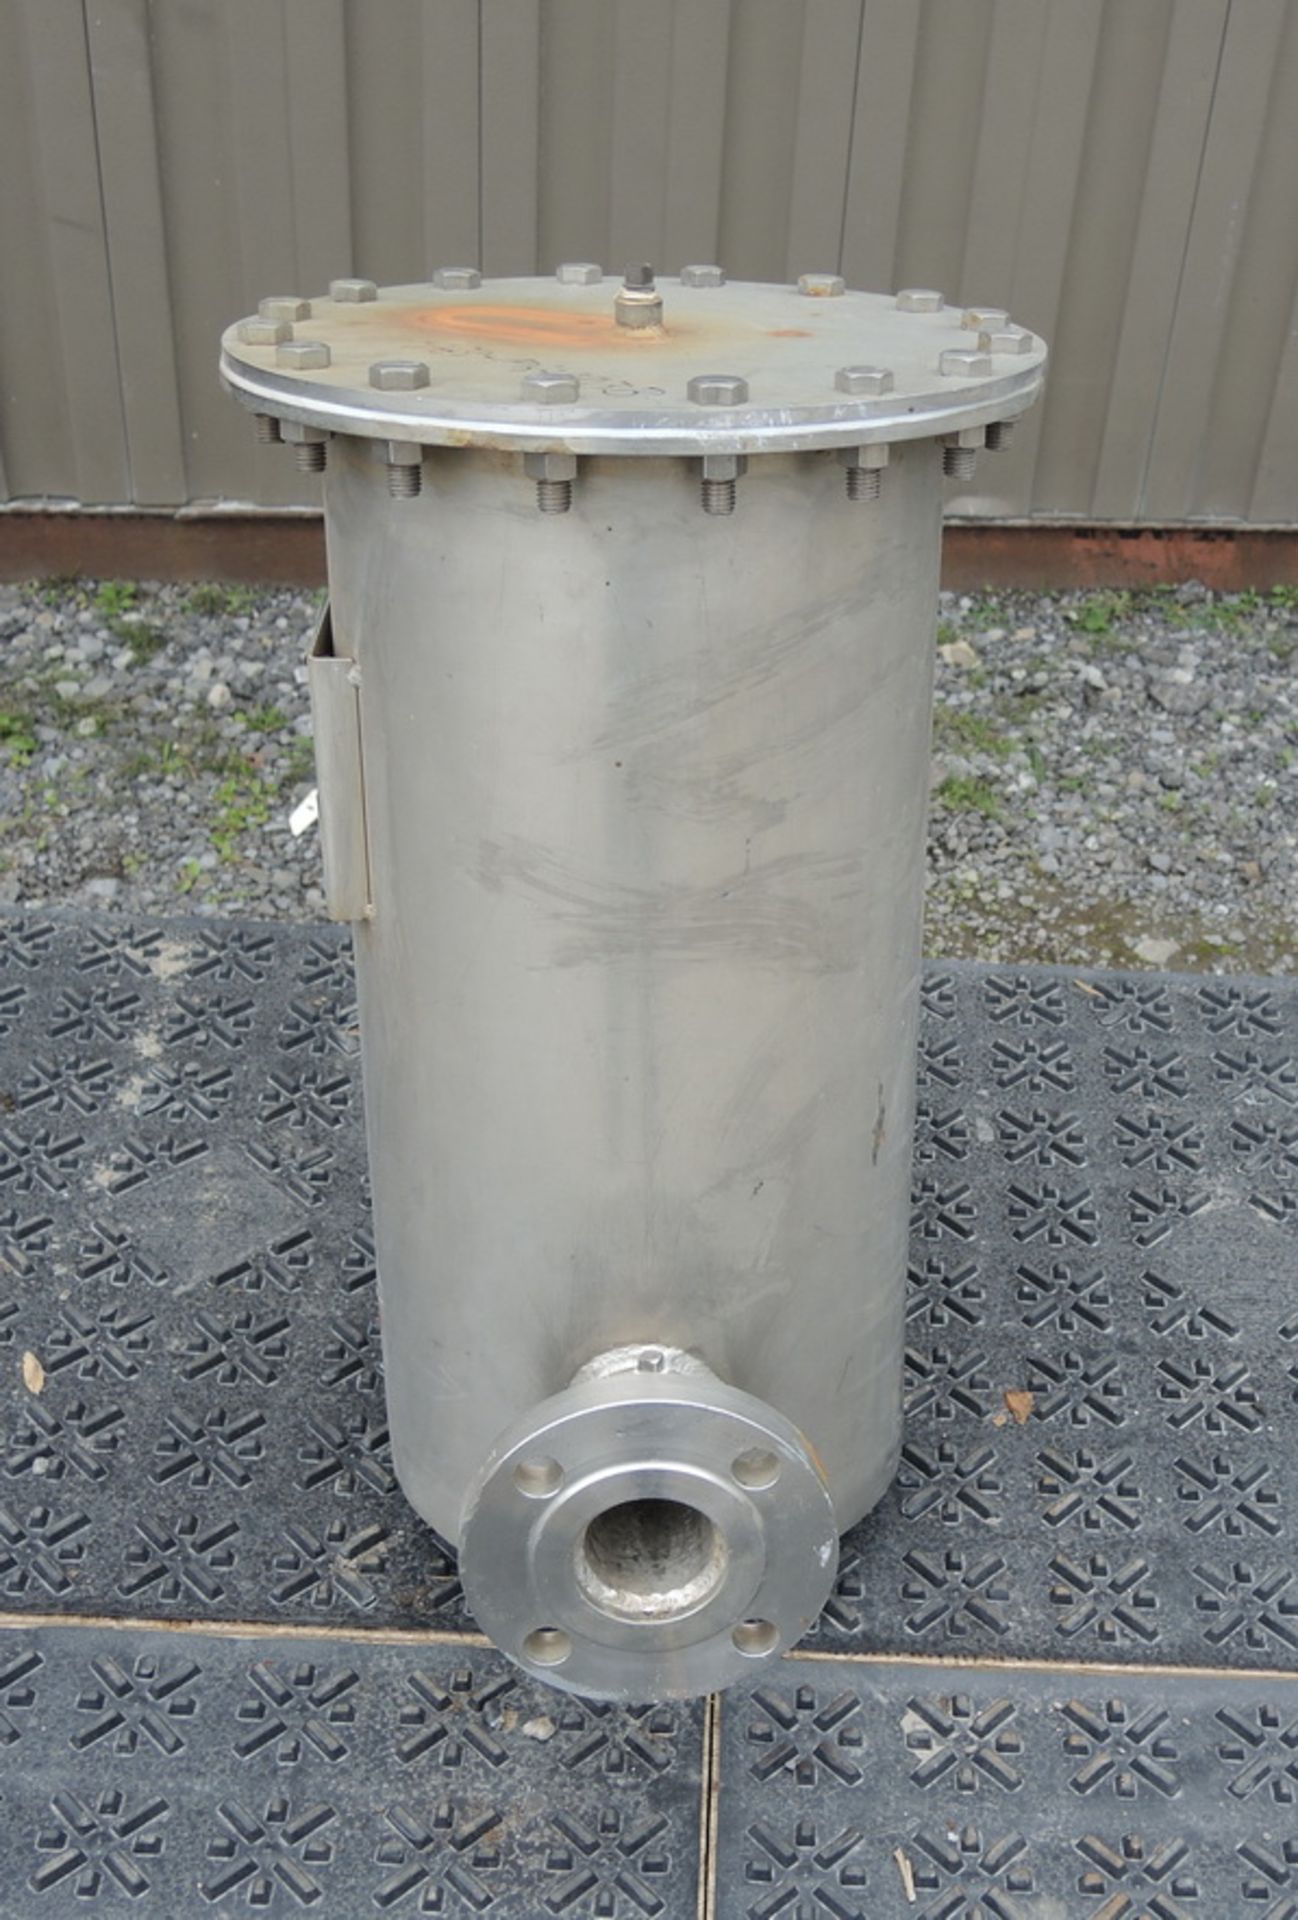 Lot of 2 FILTER, CARTRIDGE TYPE, 2" INLET/OUTLET, STAINLESS STEEL Item Location : Laval  - - Image 3 of 12